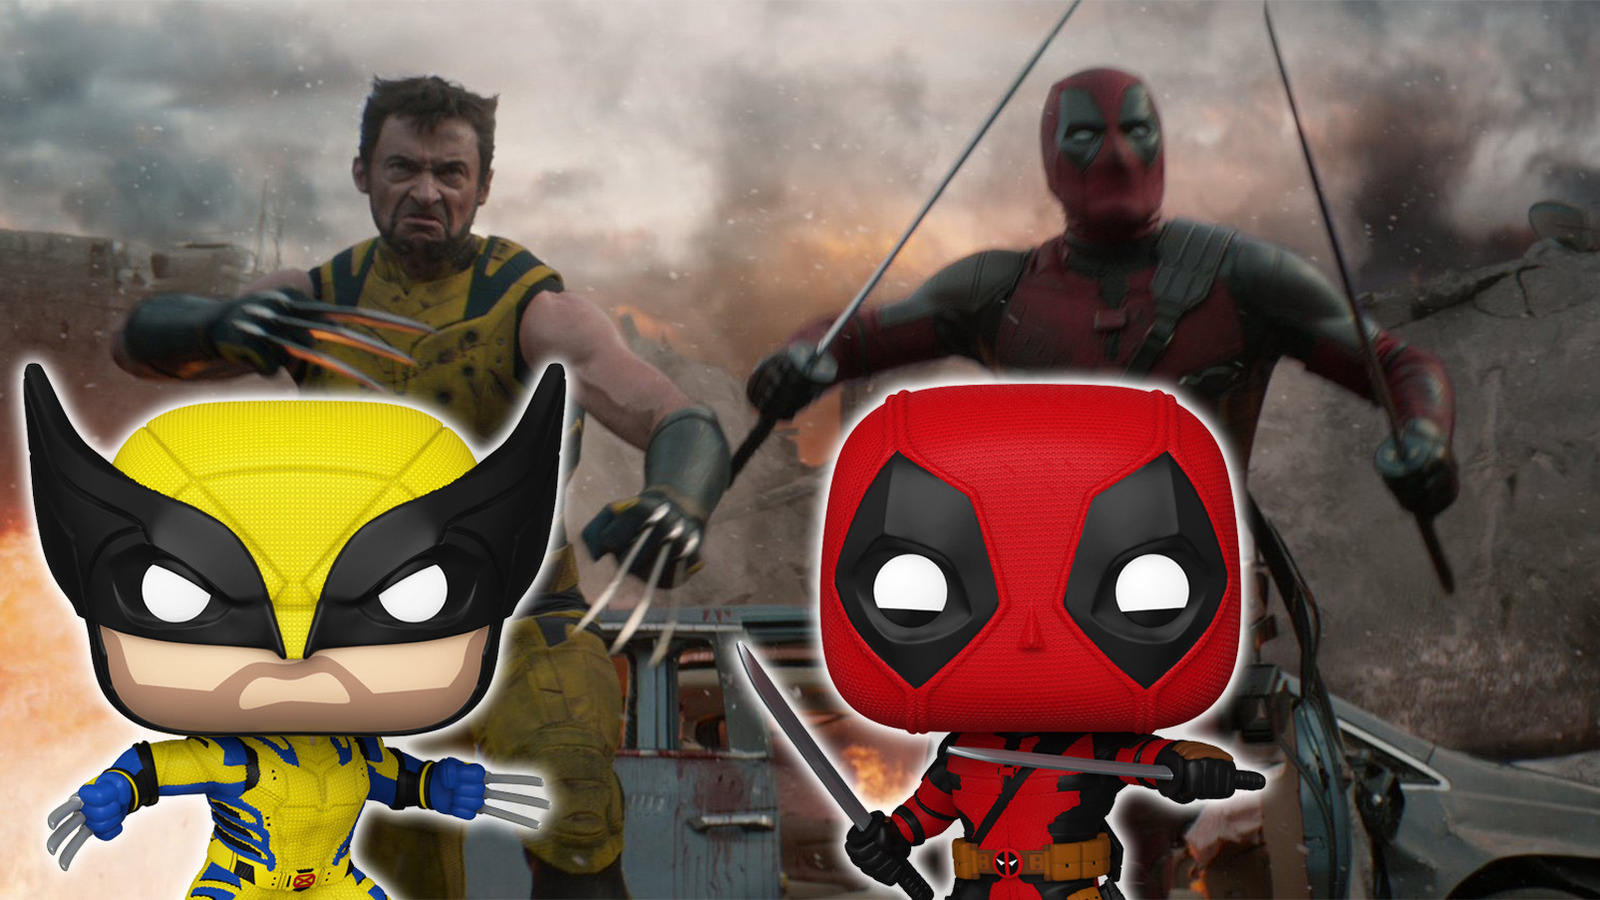 Cool Stuff: Deadpool & Wolverine Funko POPs Have The Titular Duo
Coming Together